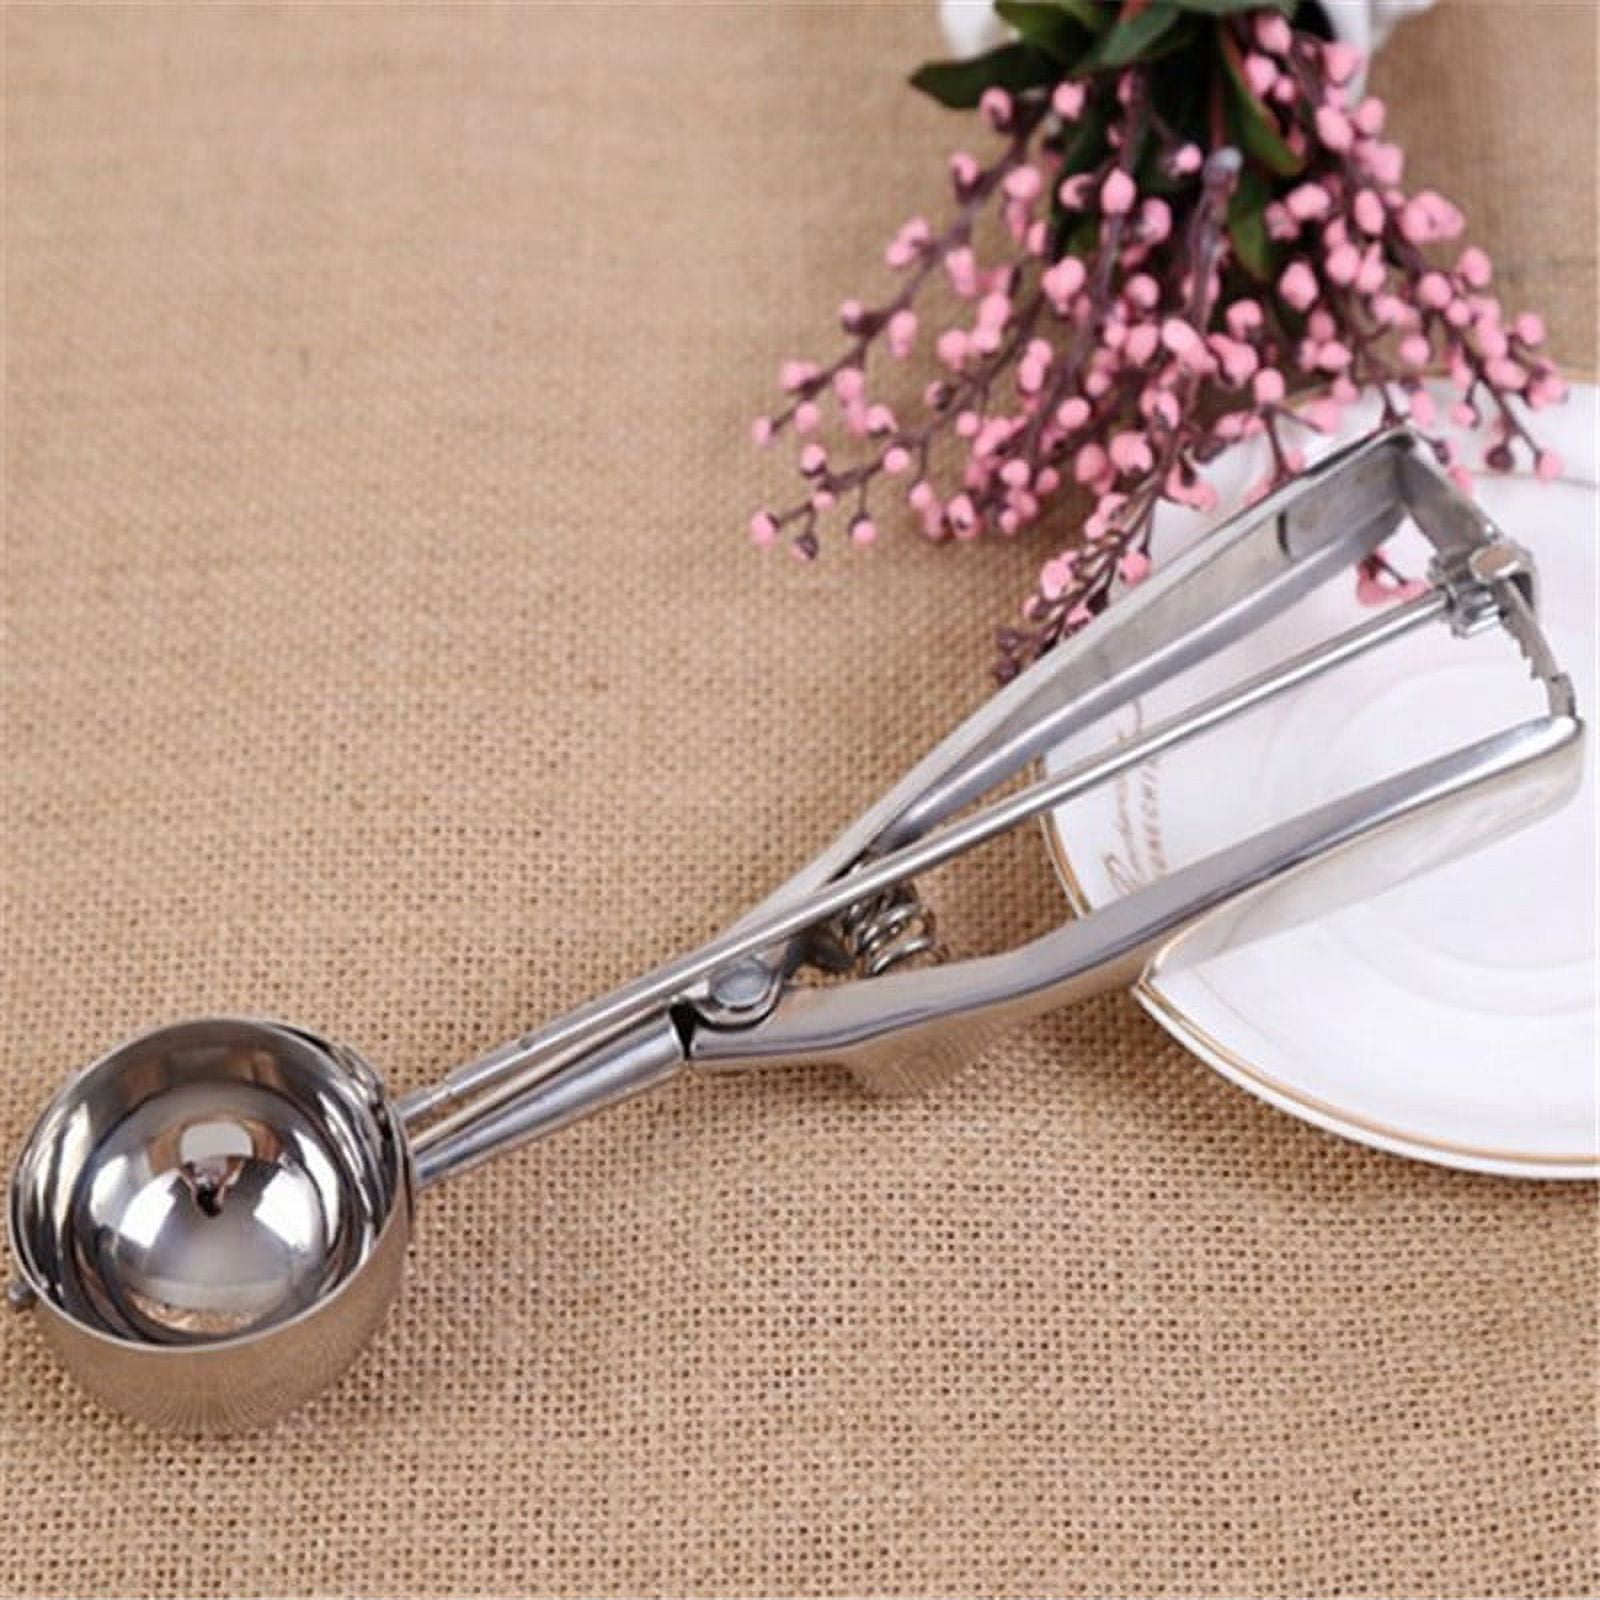 Cookie Scoop Set Professional Heavy Duty Fruit Muffin Cookie Scooper  Stainless Steel Ice Cream Scoops Set